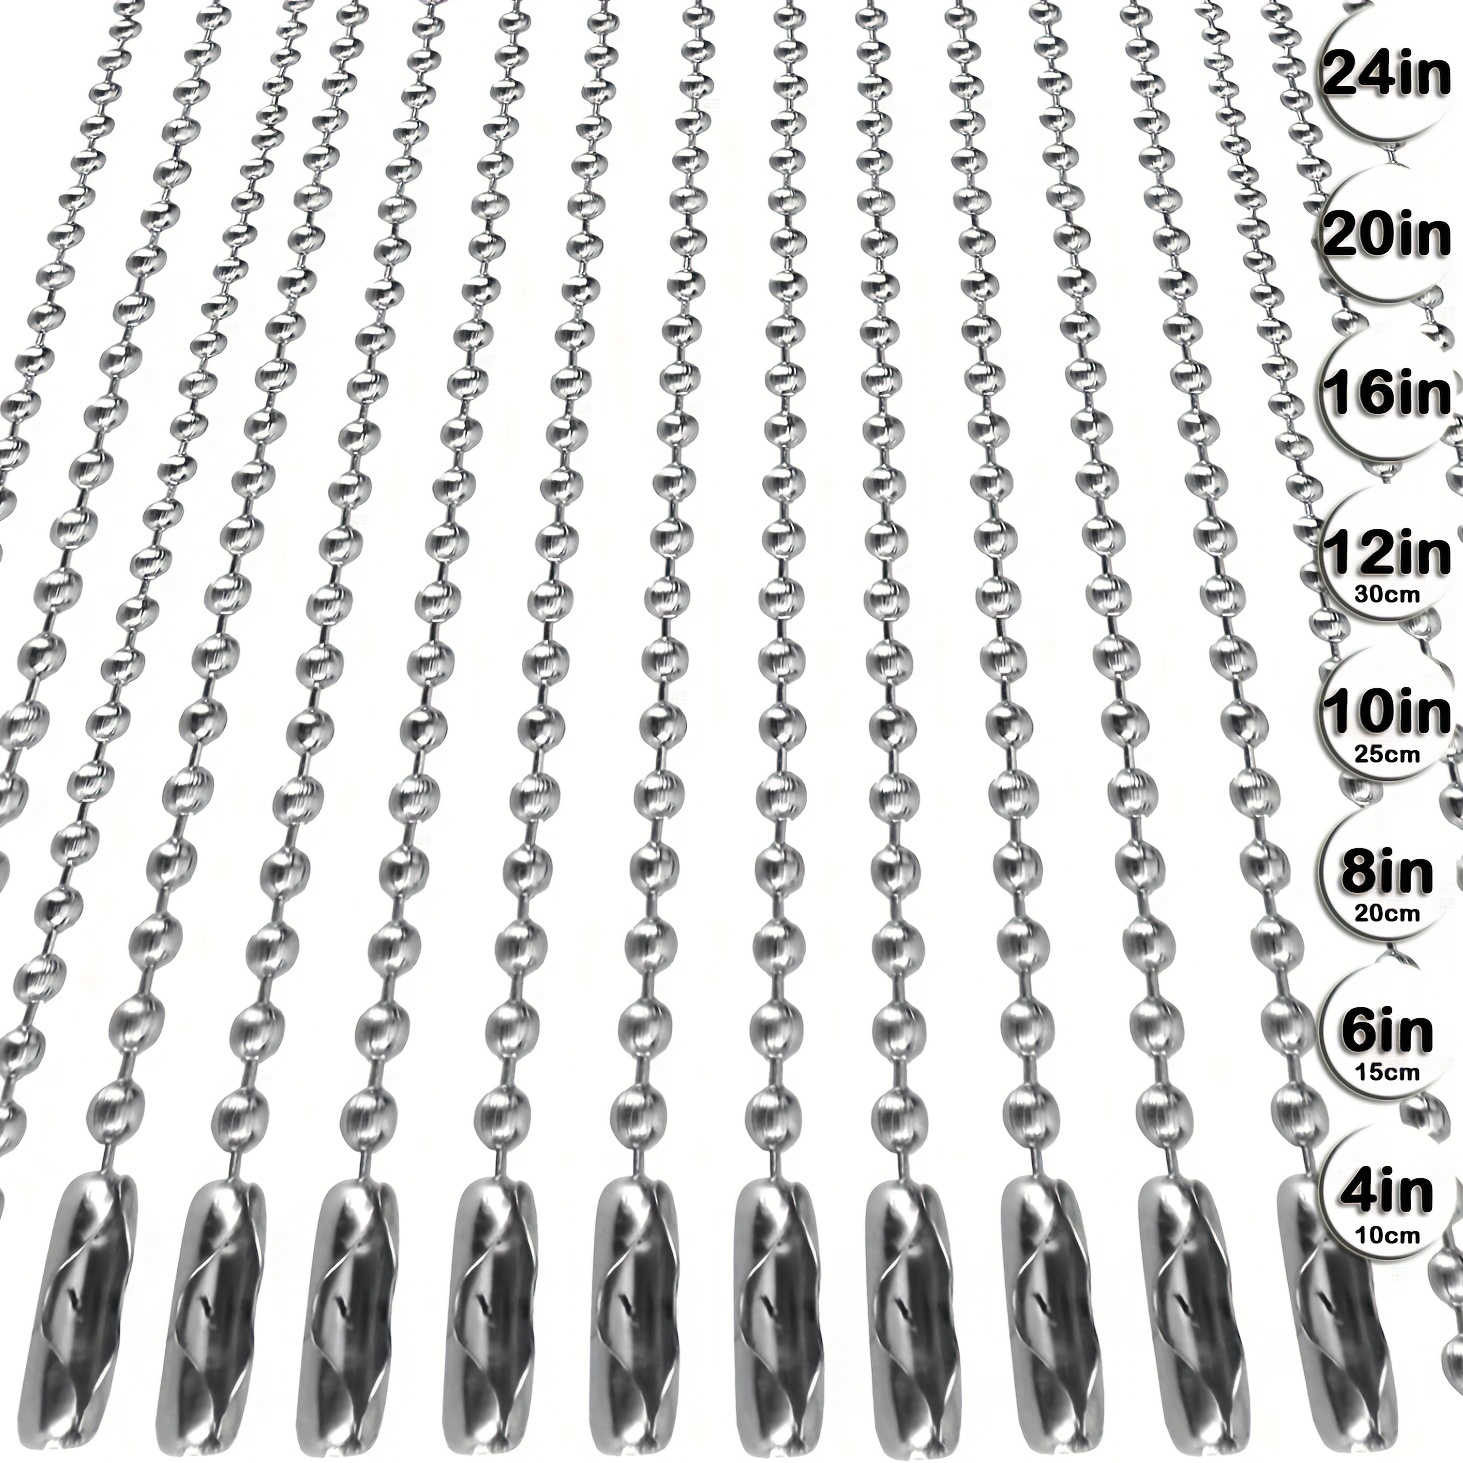  50-Pack Dog Tag Chain Ball Chain Necklace Bulk, Beaded  Necklace Chains For Jewelry Making DIY Crafts, Military Blank Dog Tag  Necklace For Men, Silver Nickel Plated Metal 24 Long 2.4mm